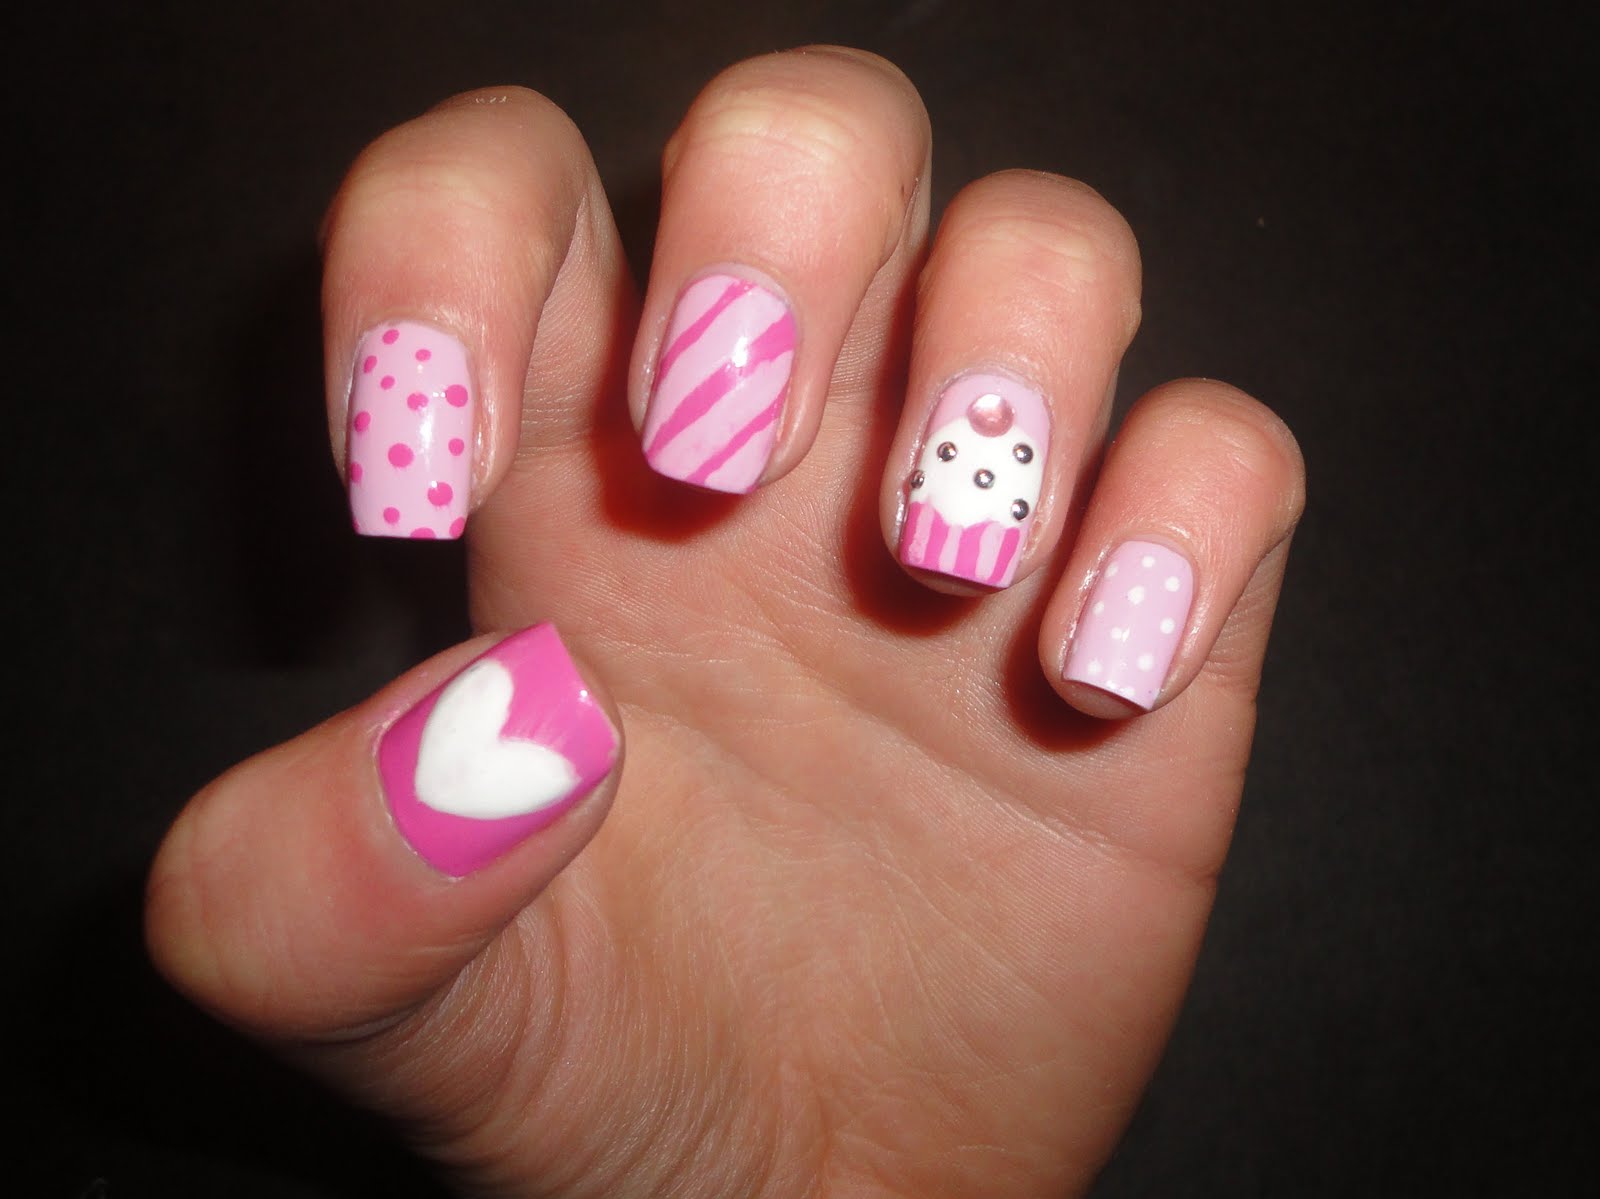 1. 20 Cute Nail Designs for Tumblr Fans - wide 4